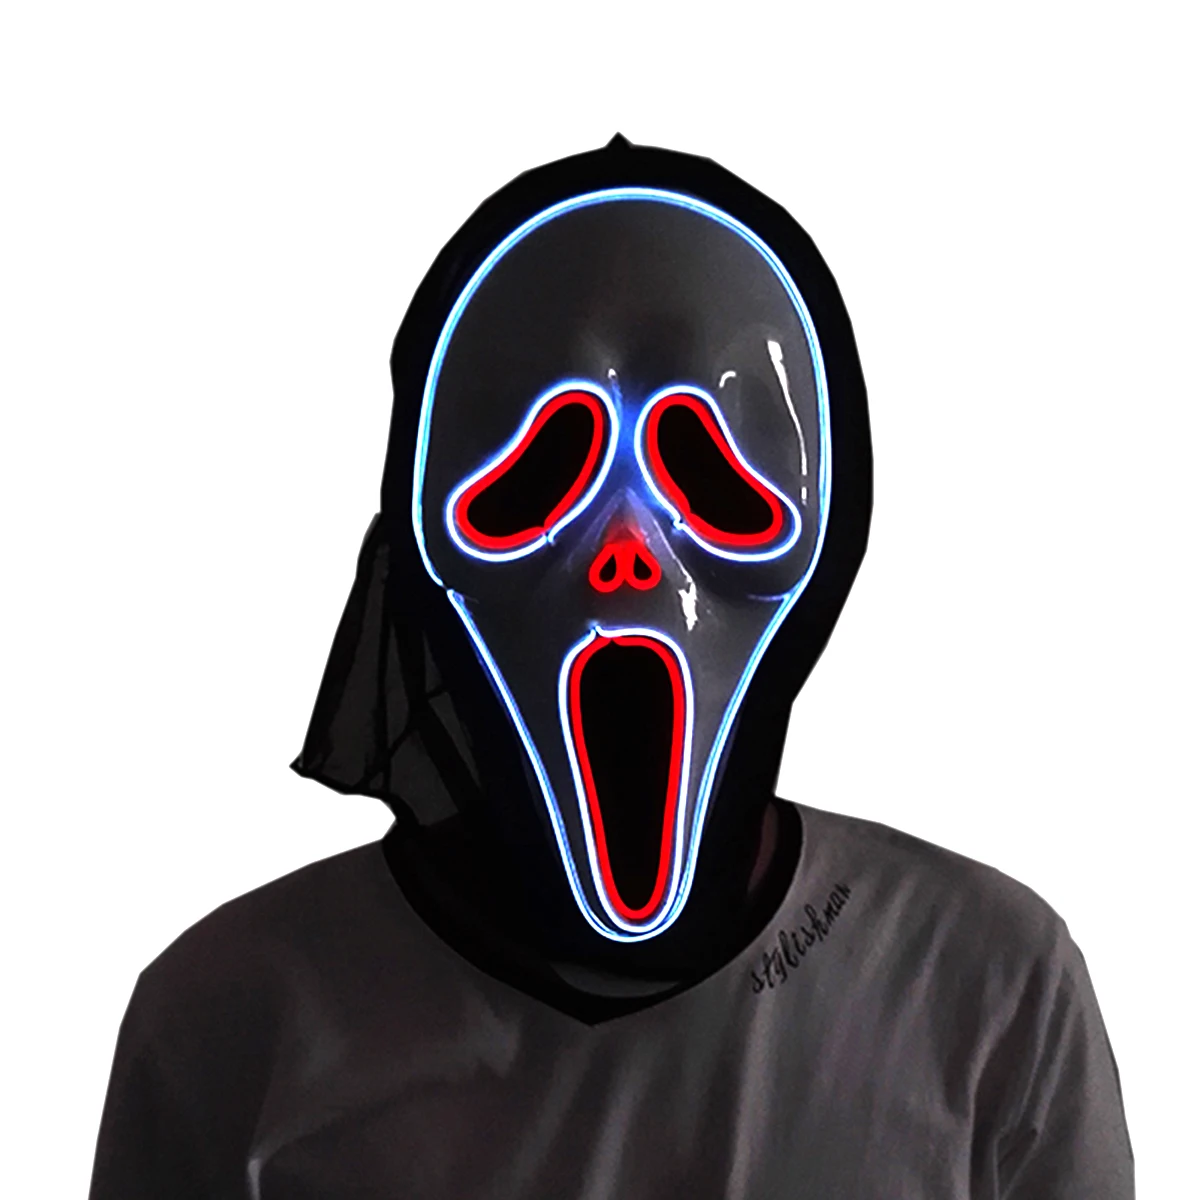 Scary scream. Red Hood face Mask.